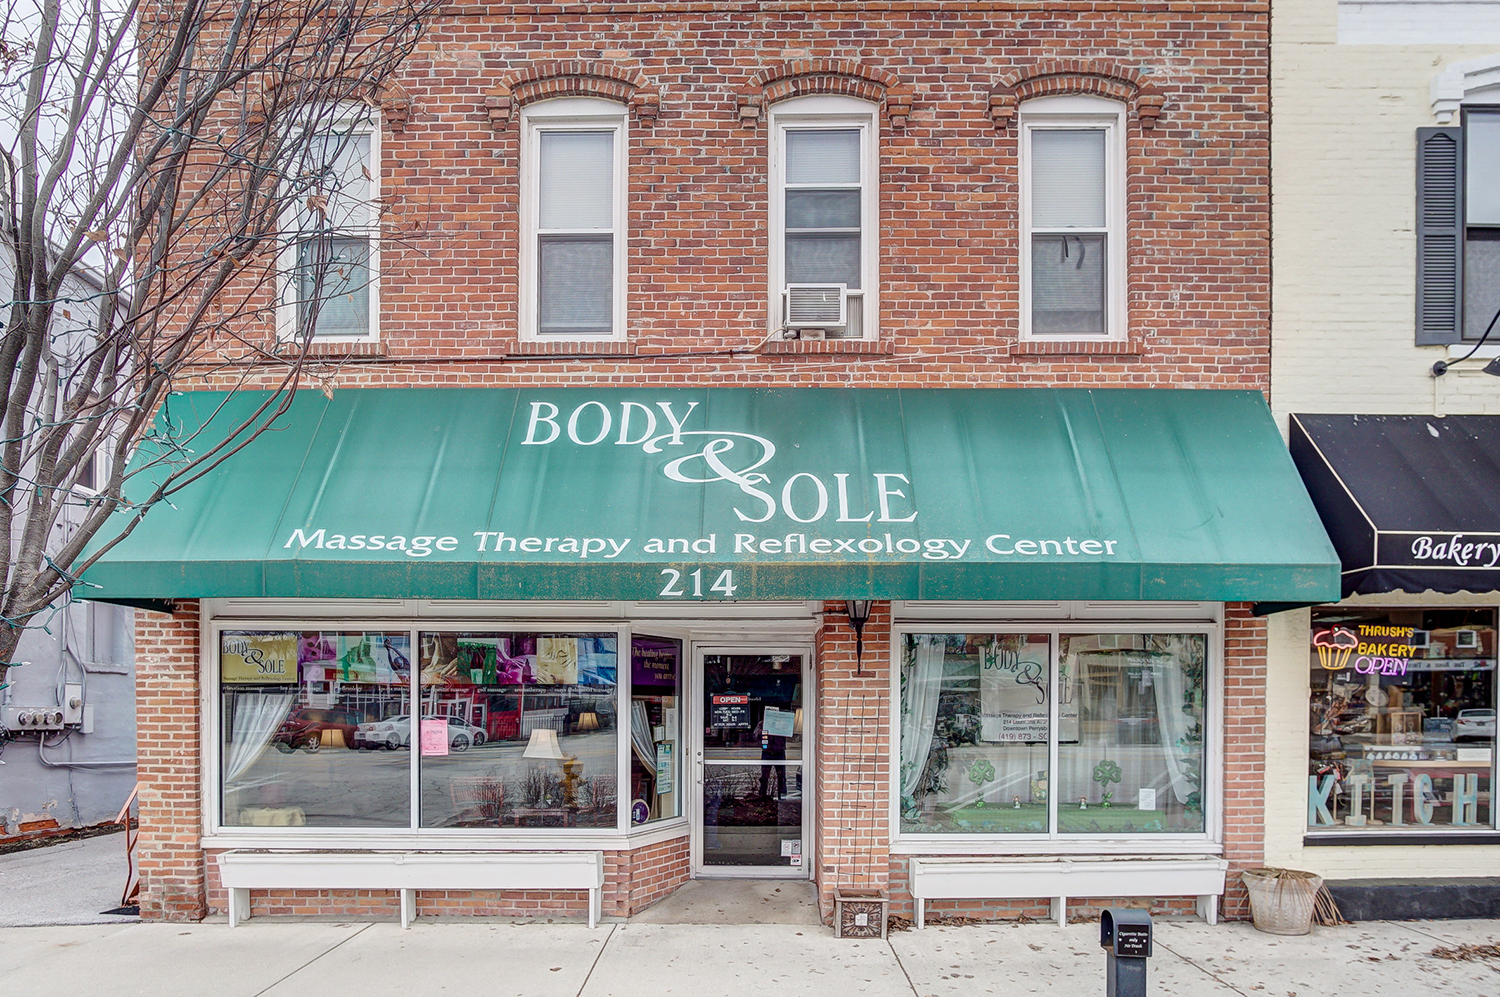 Body & Sole Massage Therapy and Reflexology Center